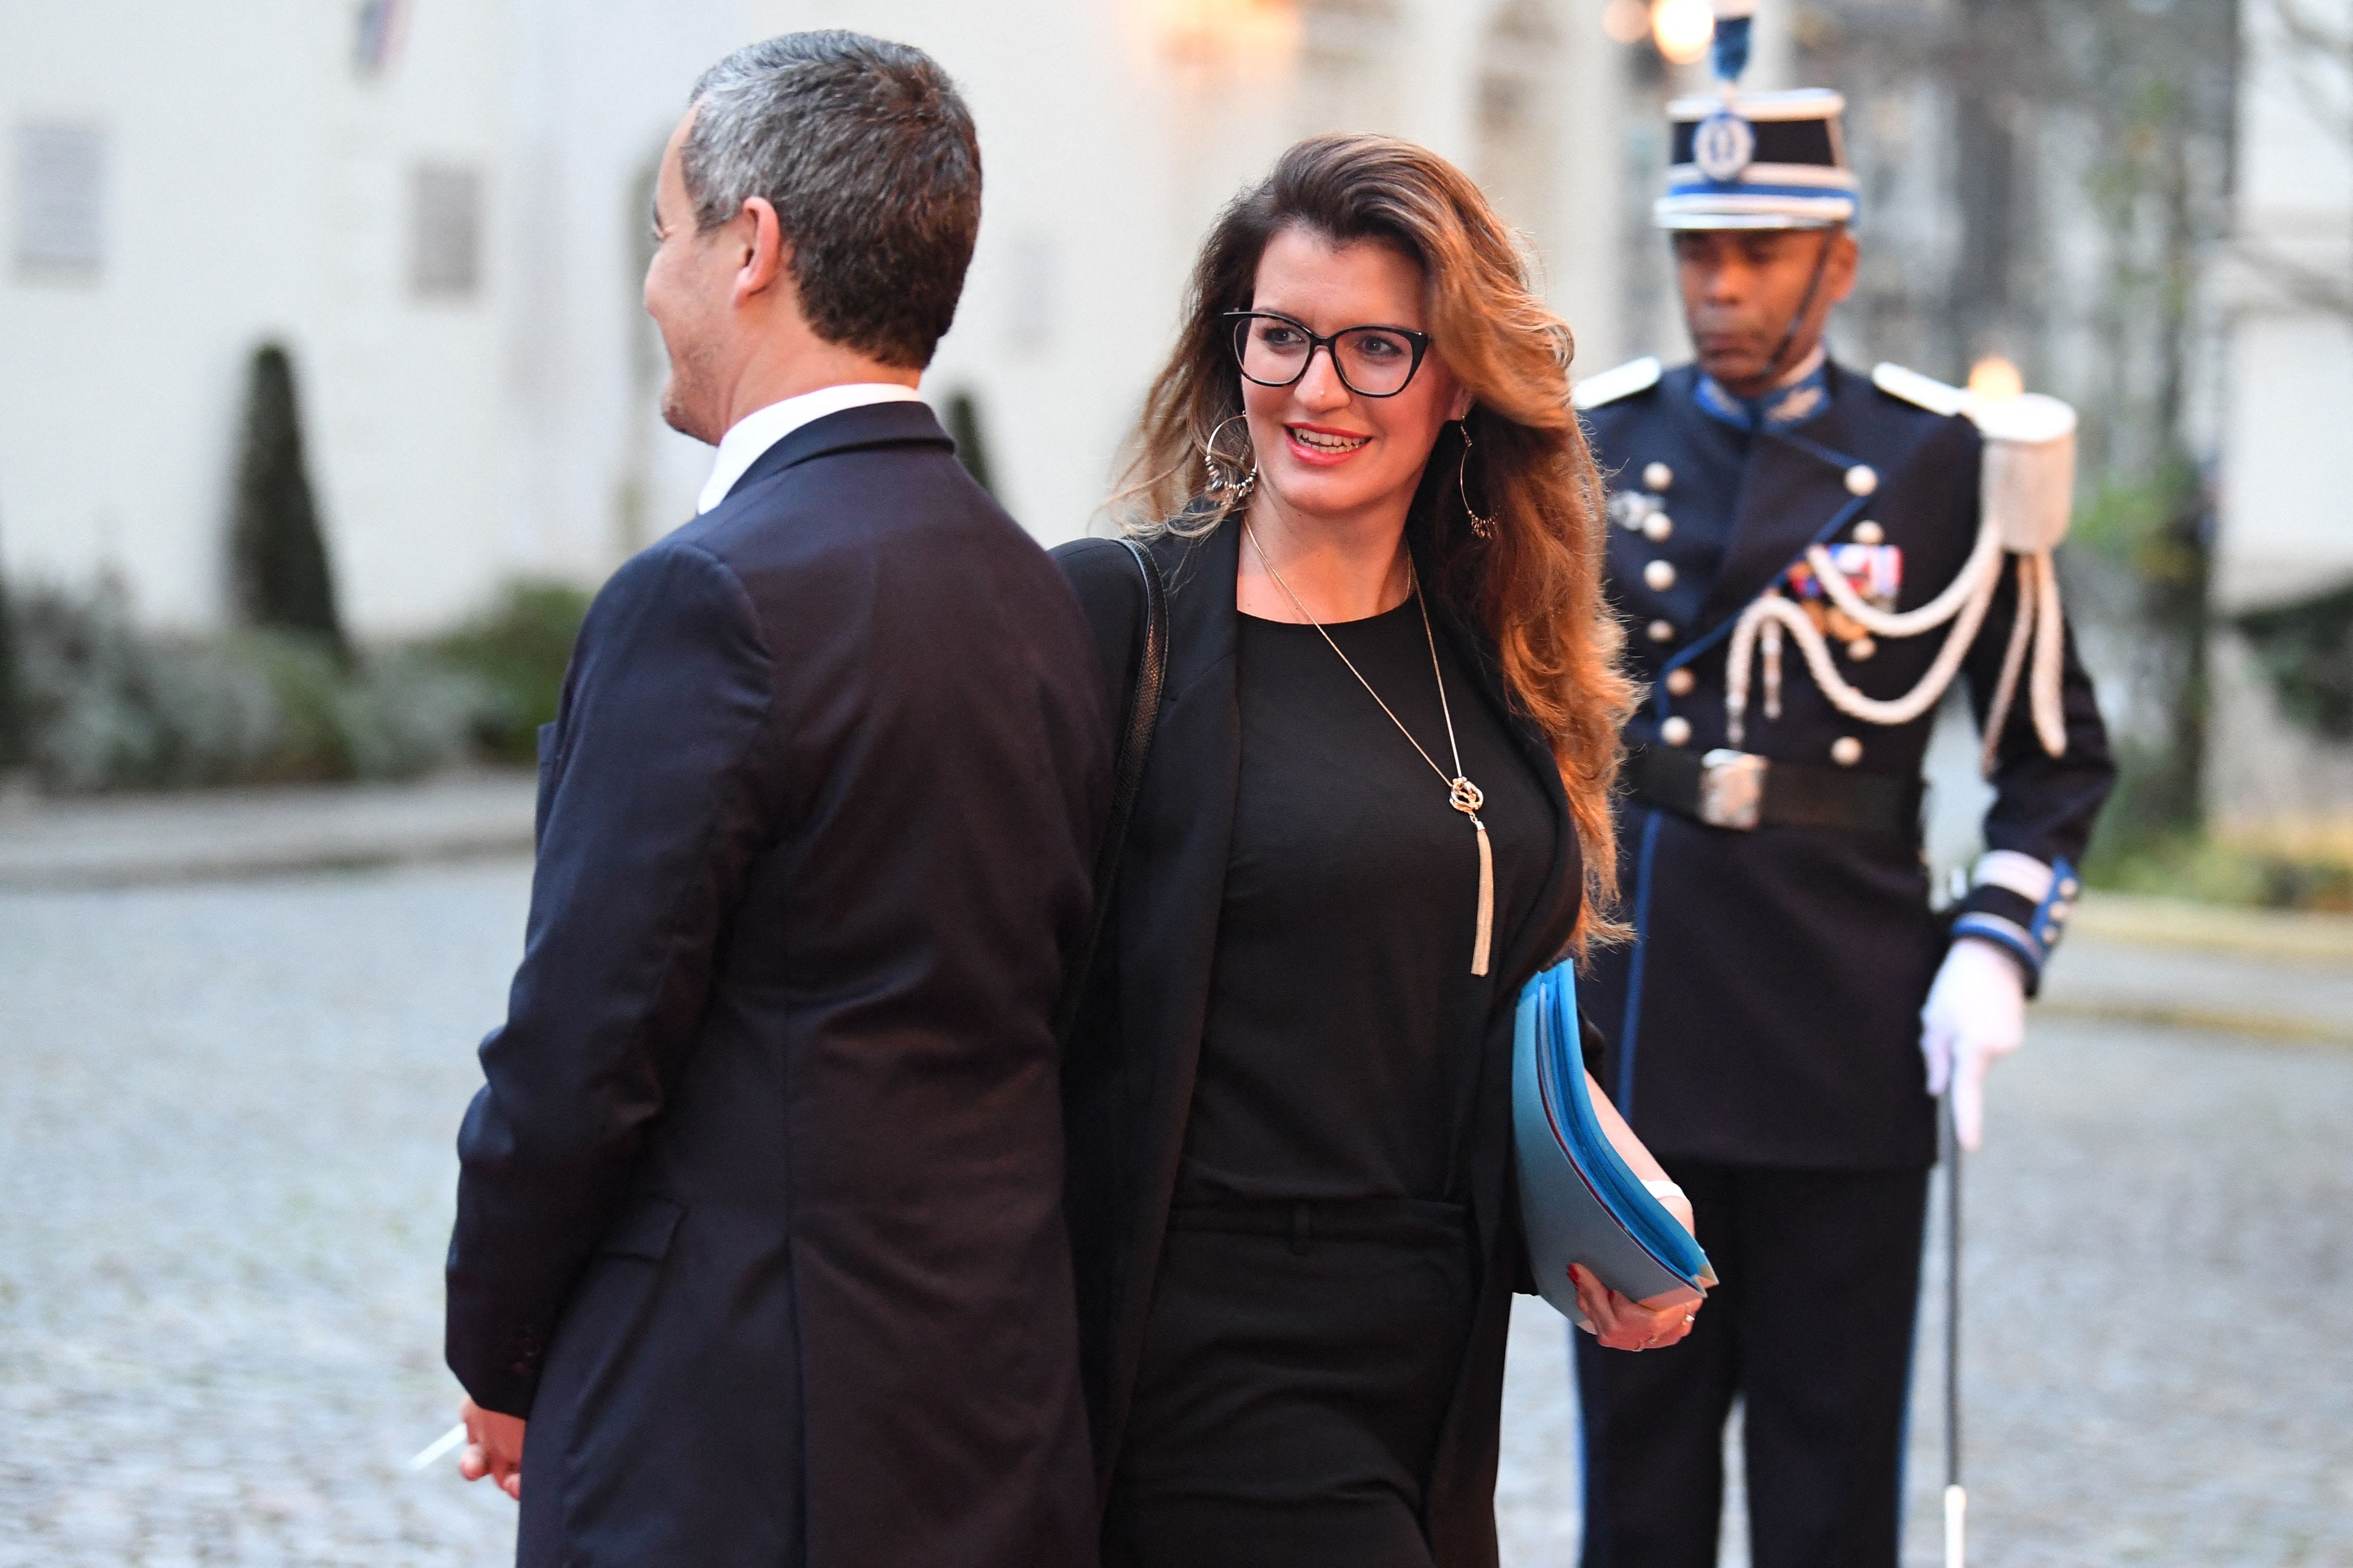 French minister Marlene Schiappa criticized over Playboy cover photoshoot